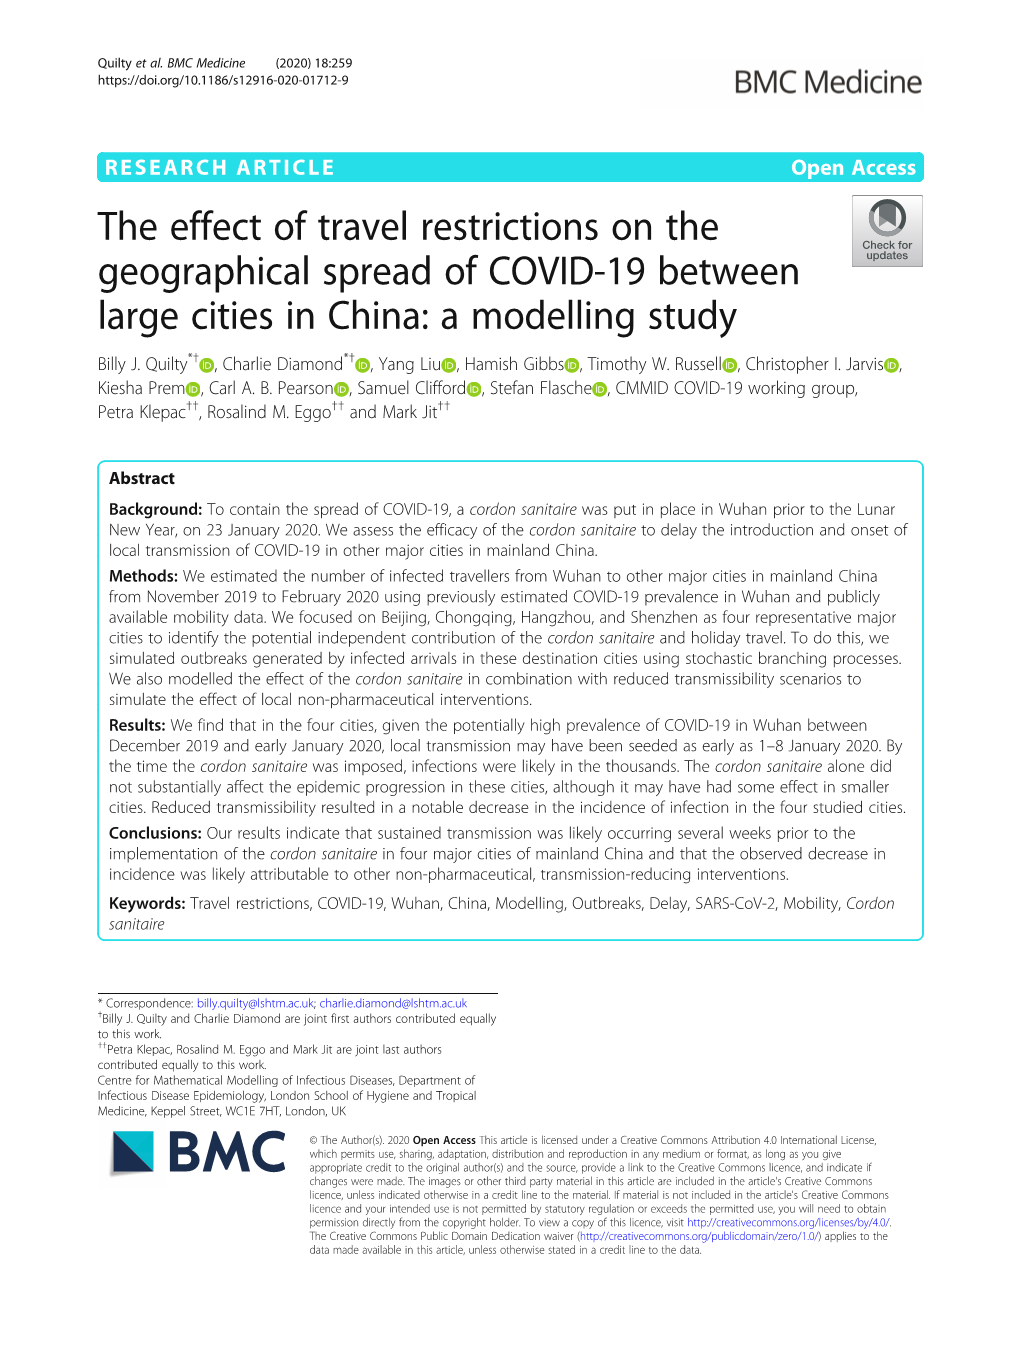 The Effect of Travel Restrictions on the Geographical Spread of COVID-19 Between Large Cities in China: a Modelling Study Billy J